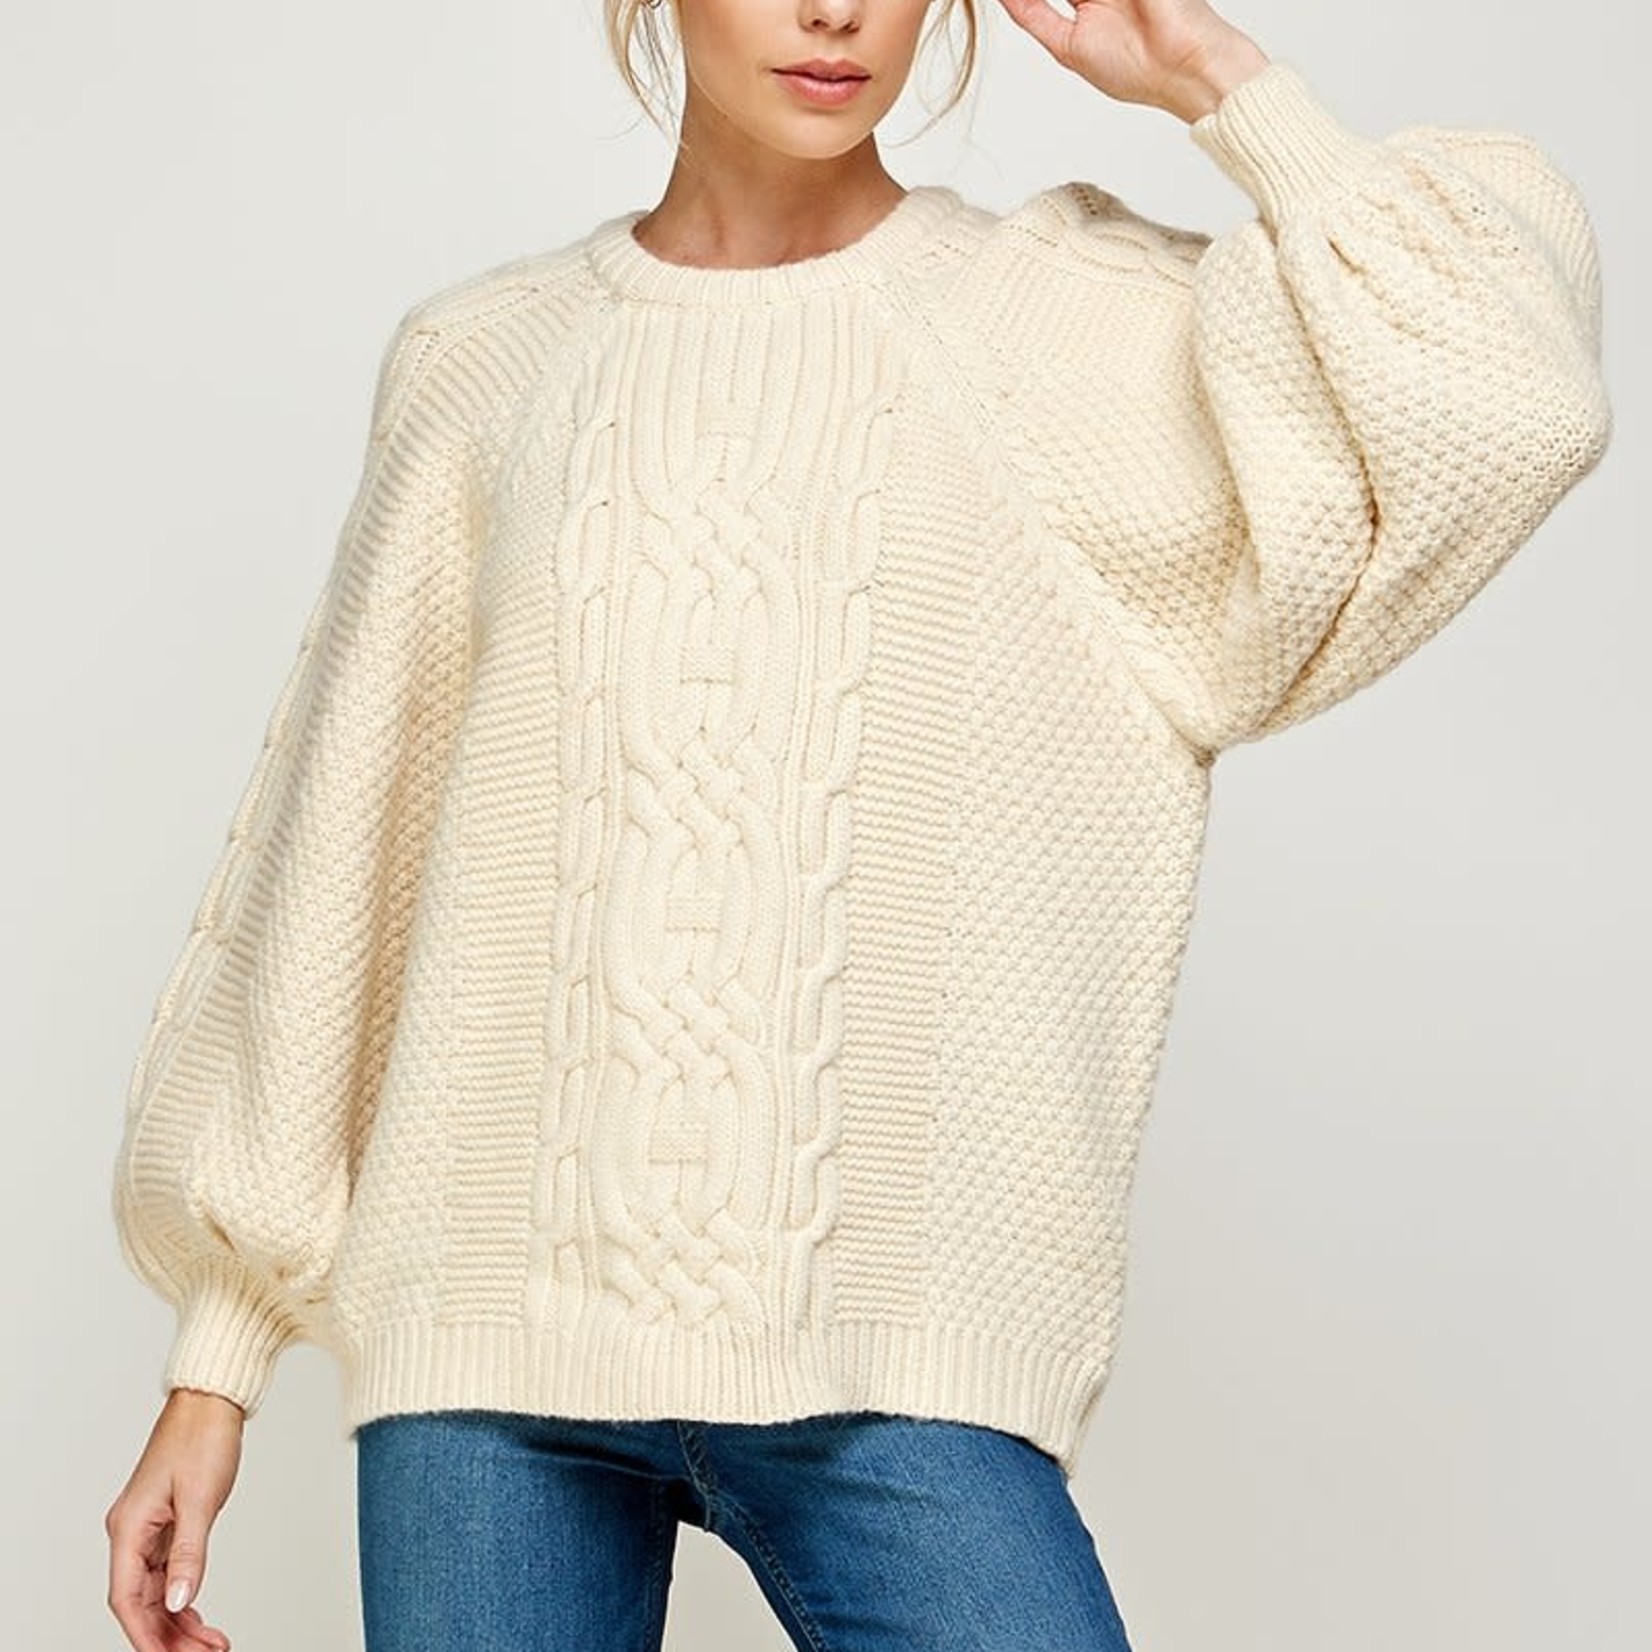 See & Be Seen Cream Detailed Sweater